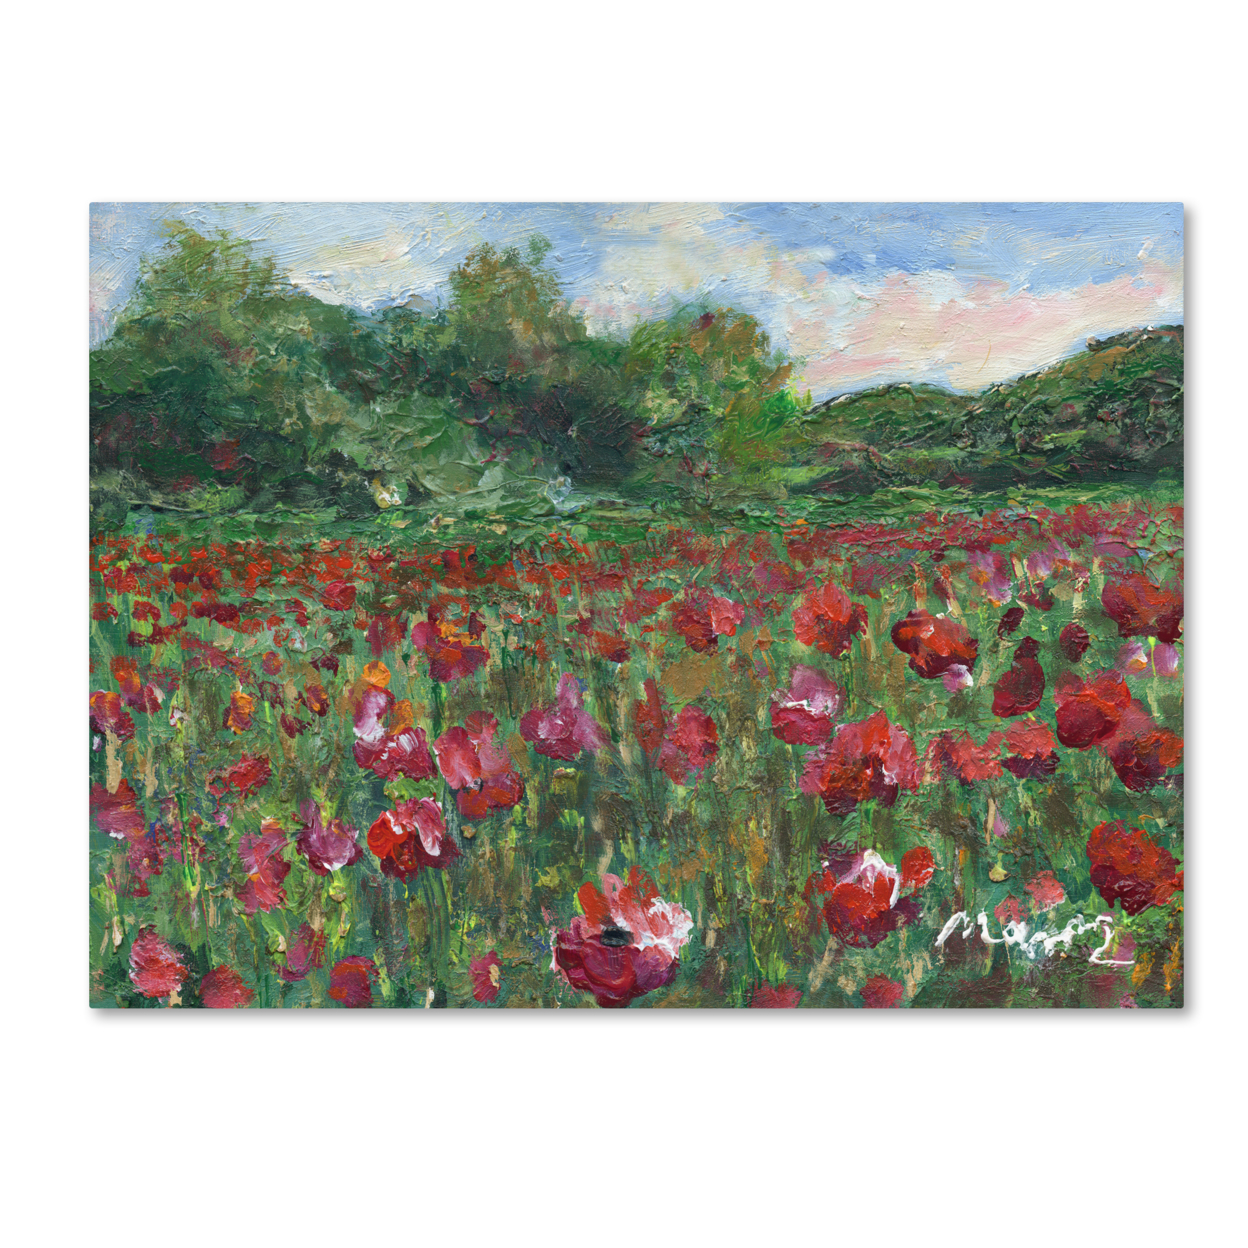 Manor Shadian 'Poppy Field Wood' Canvas Wall Art 35 X 47 Inches